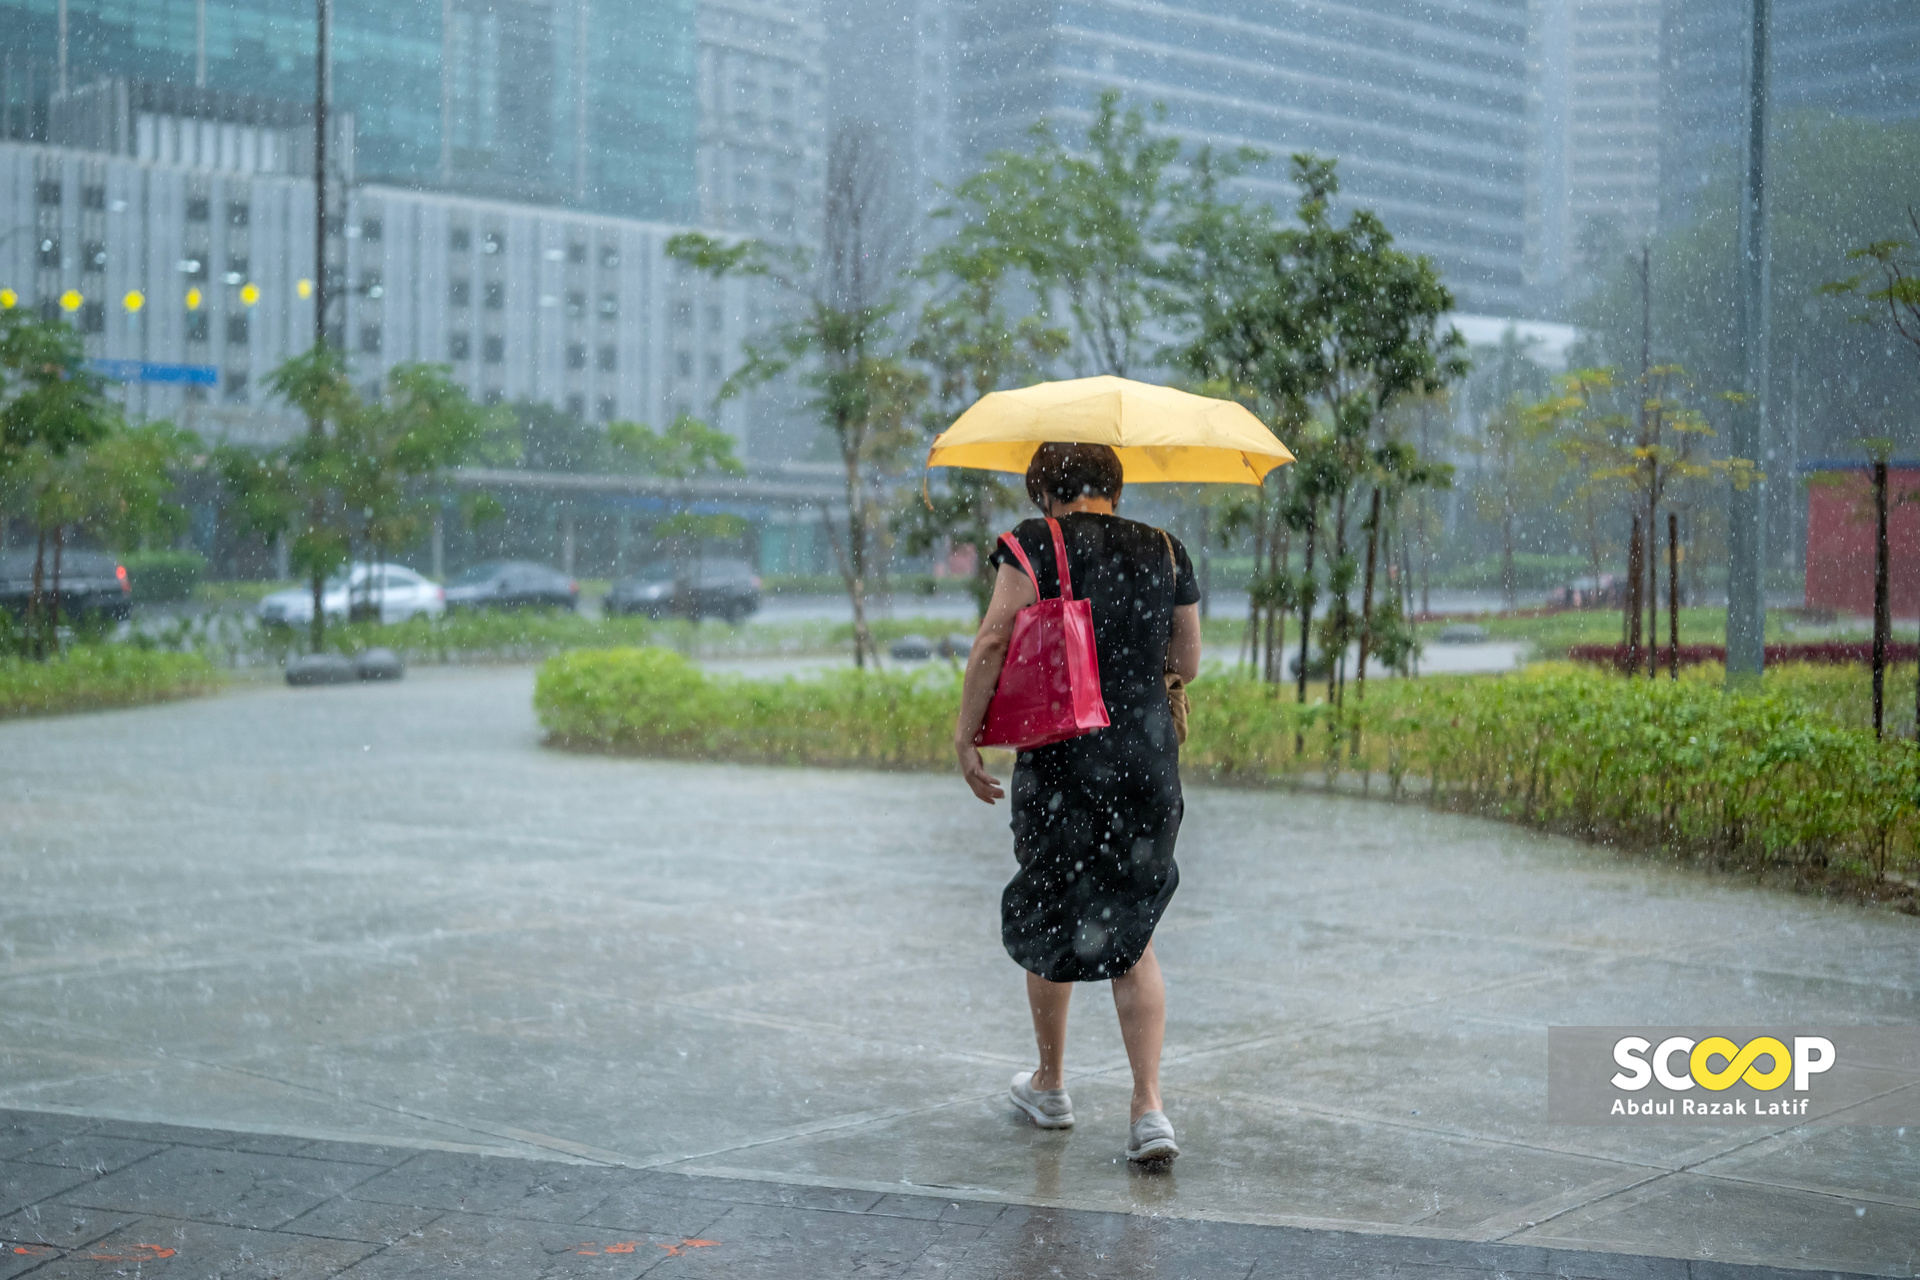 Photo of the Day: Sweltering heat to soothing rain, Malaysia braces for monsoon season